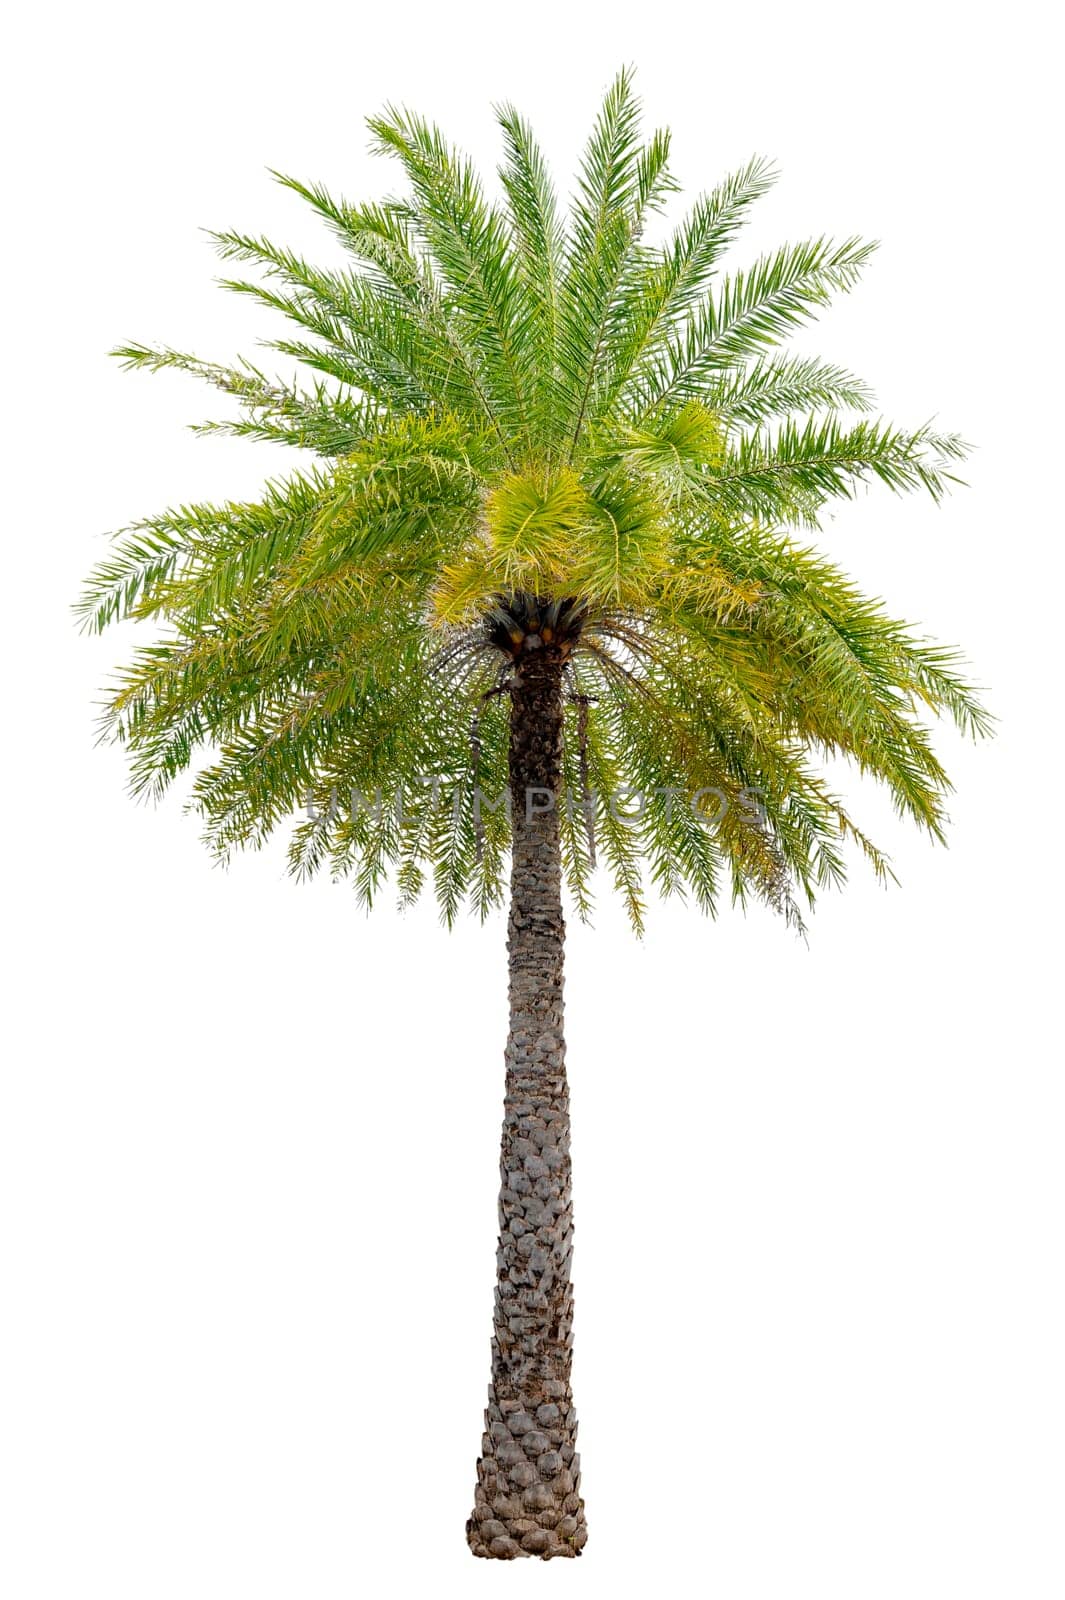 Big palm trees used in garden decoration on white background. Isolated by sarayut_thaneerat